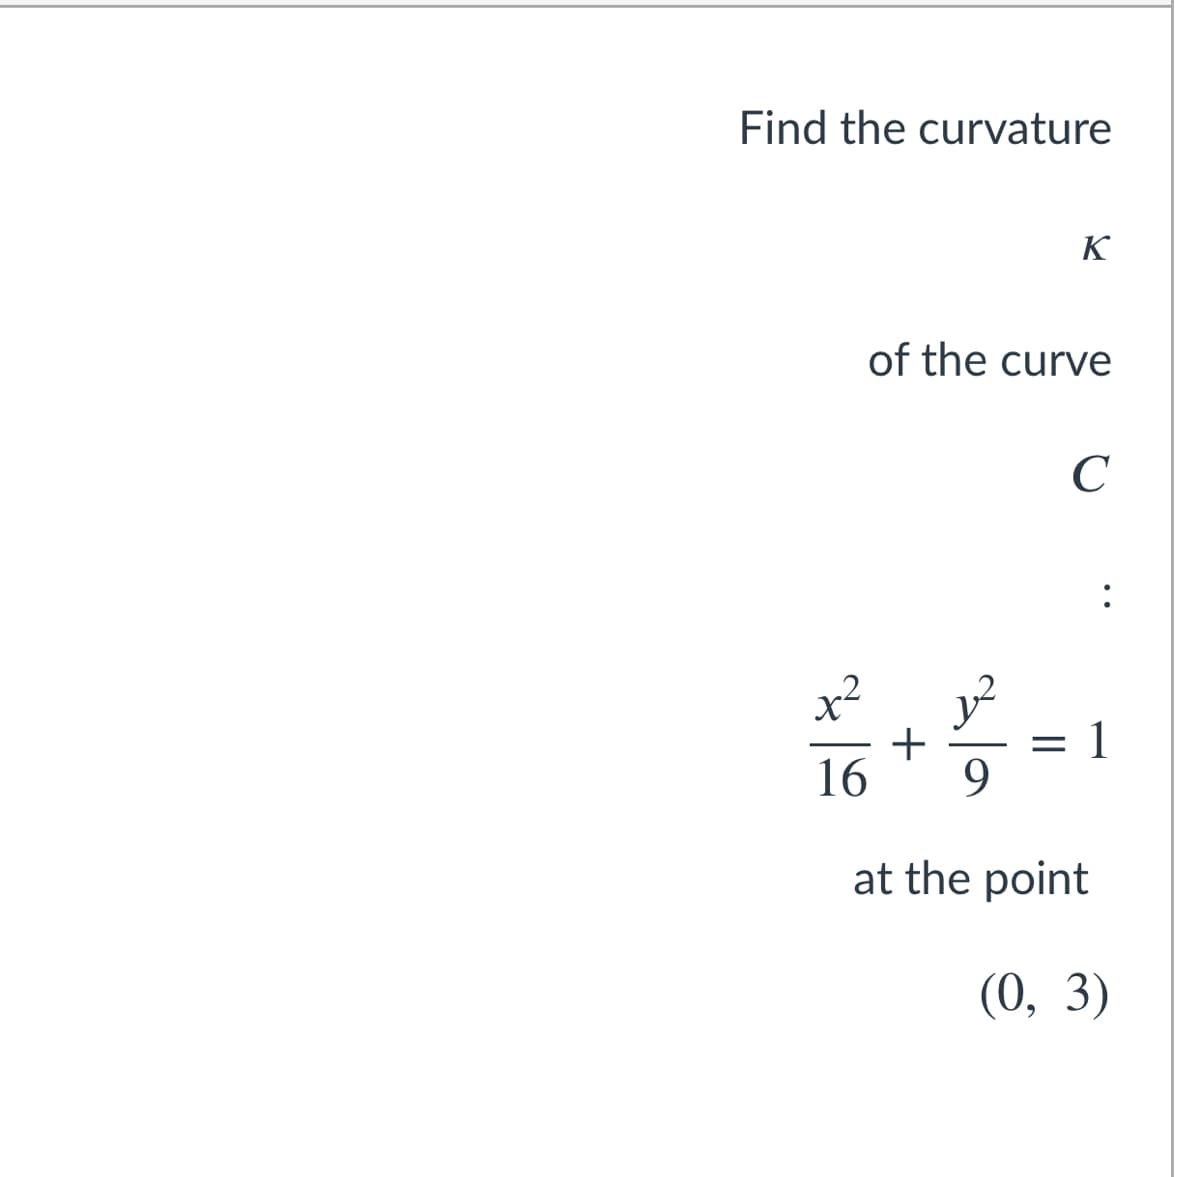 Find the curvature
K
of the curve
x²
1
9.
16
at the point
(0, 3)
(O,
